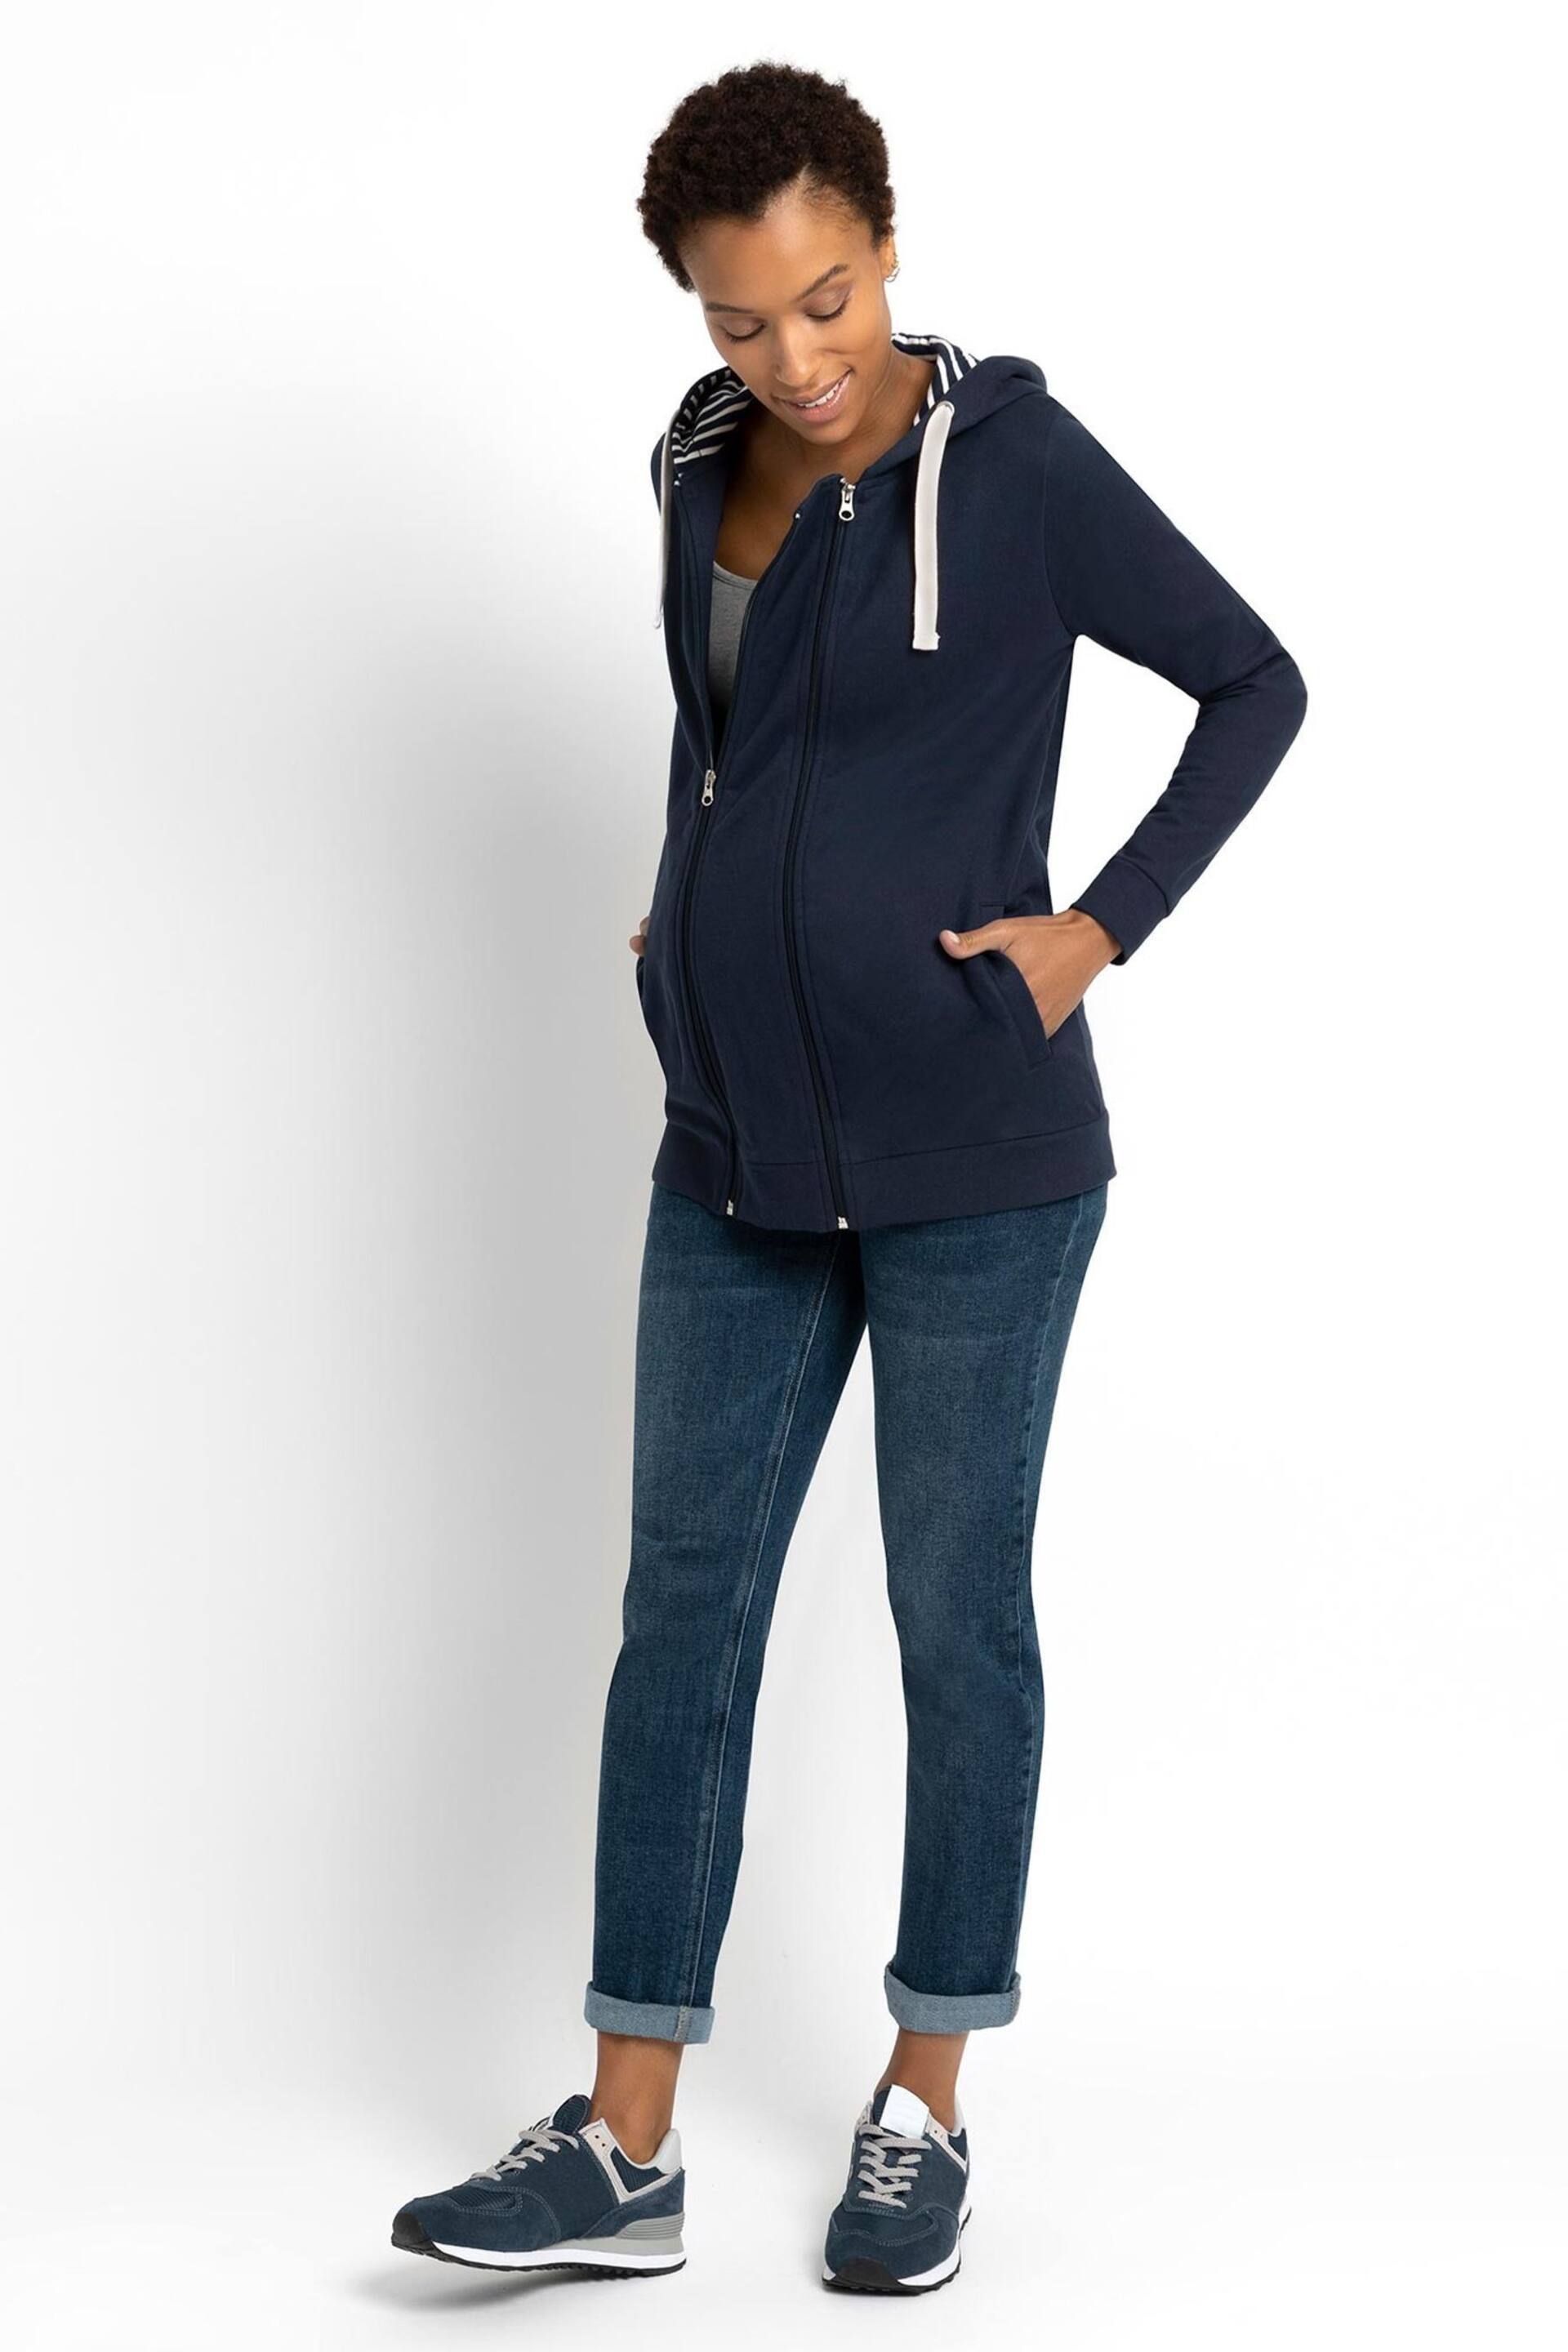 JoJo Maman Bébé Navy Blue 3-in-1 Hoodie with Baby Carrier Panel - Image 1 of 4